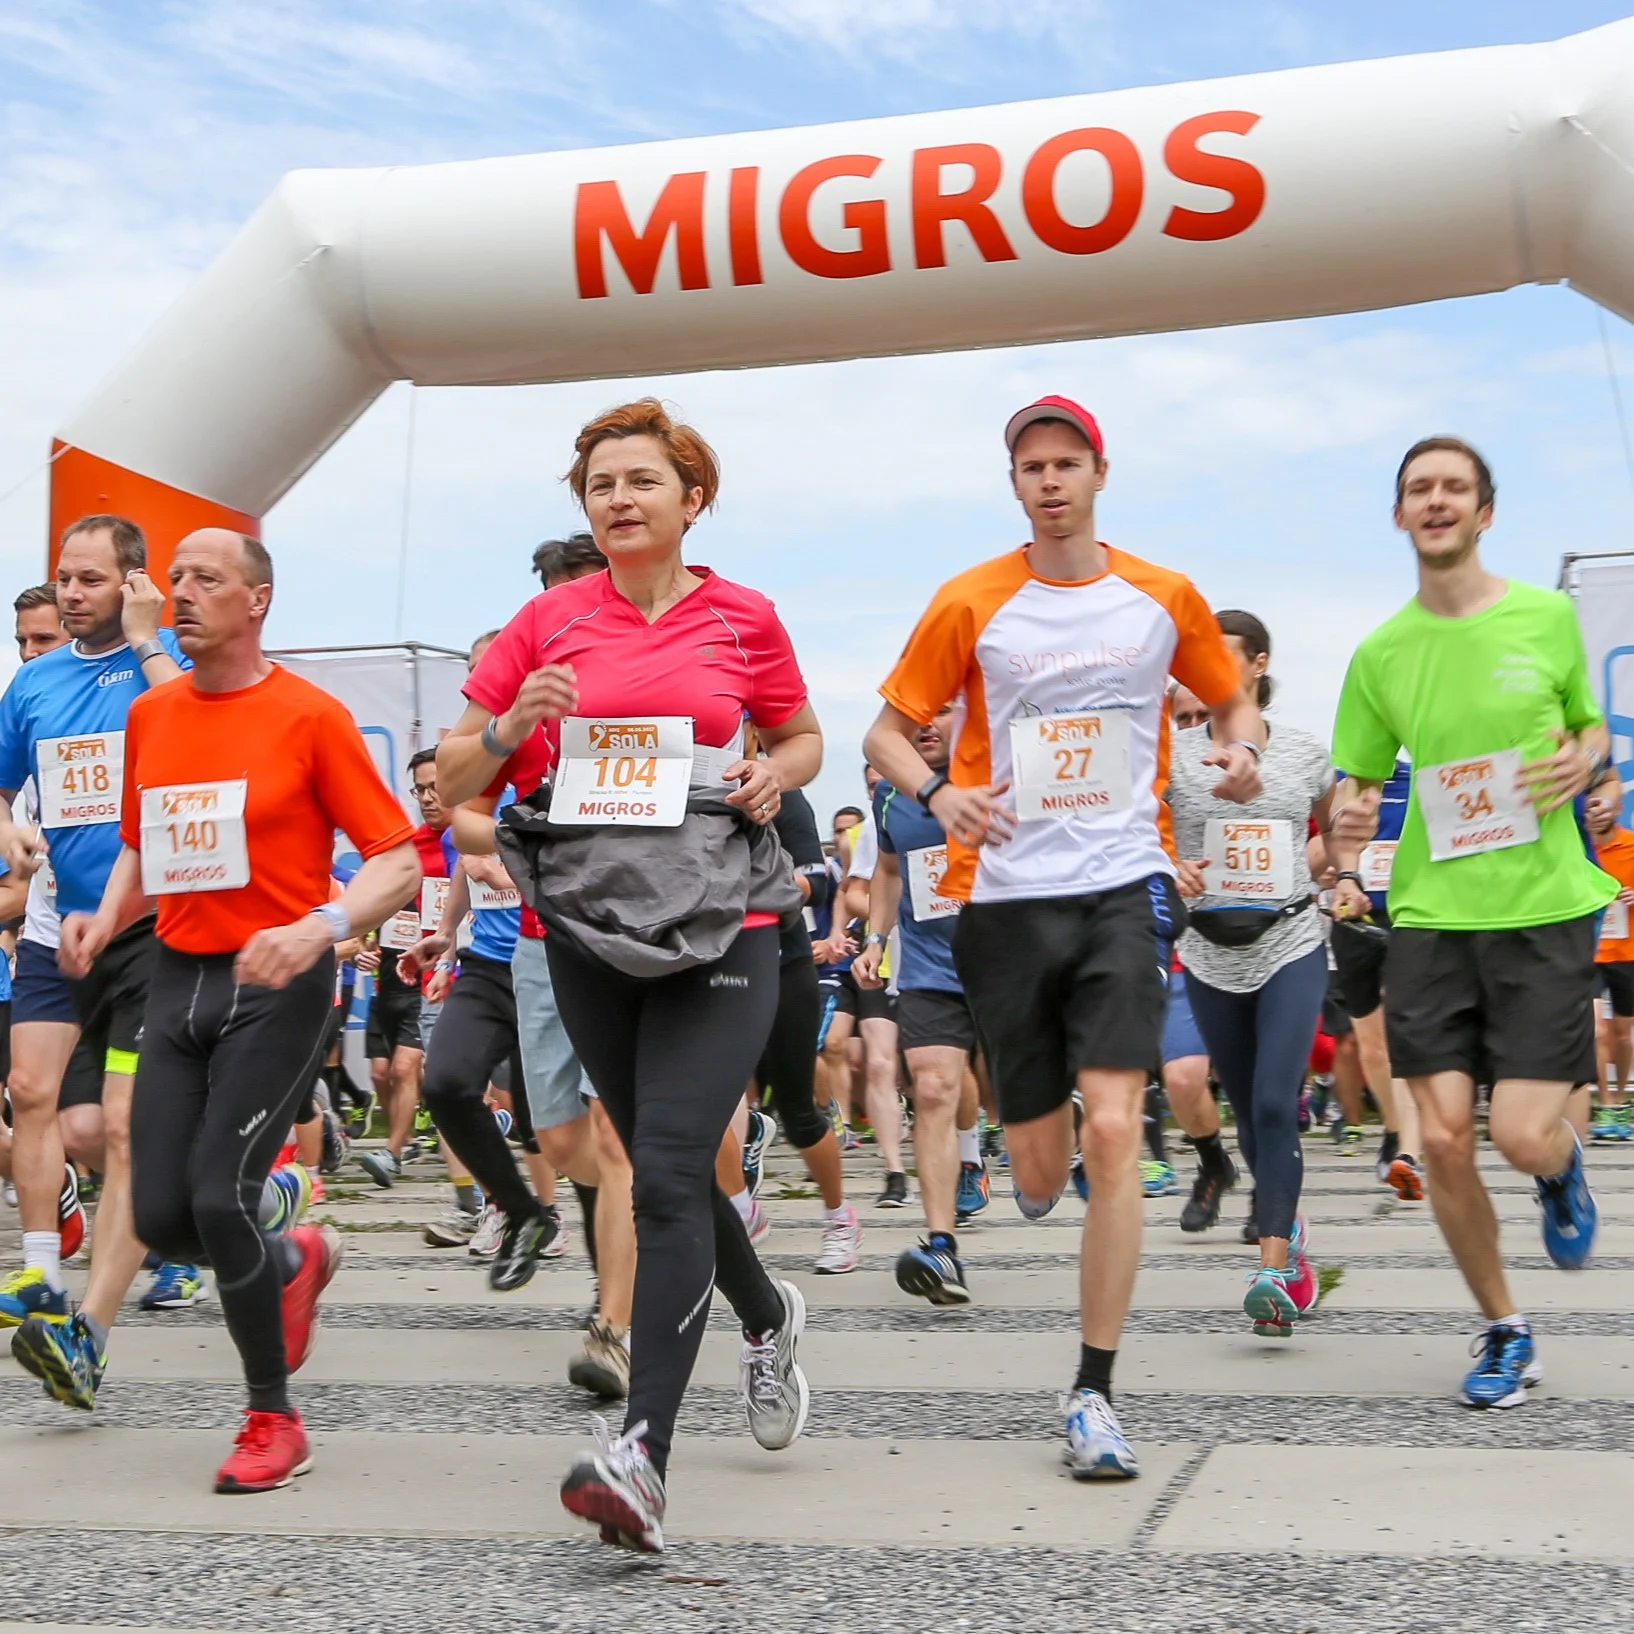 Runners pass under an inflatable Migros archway.